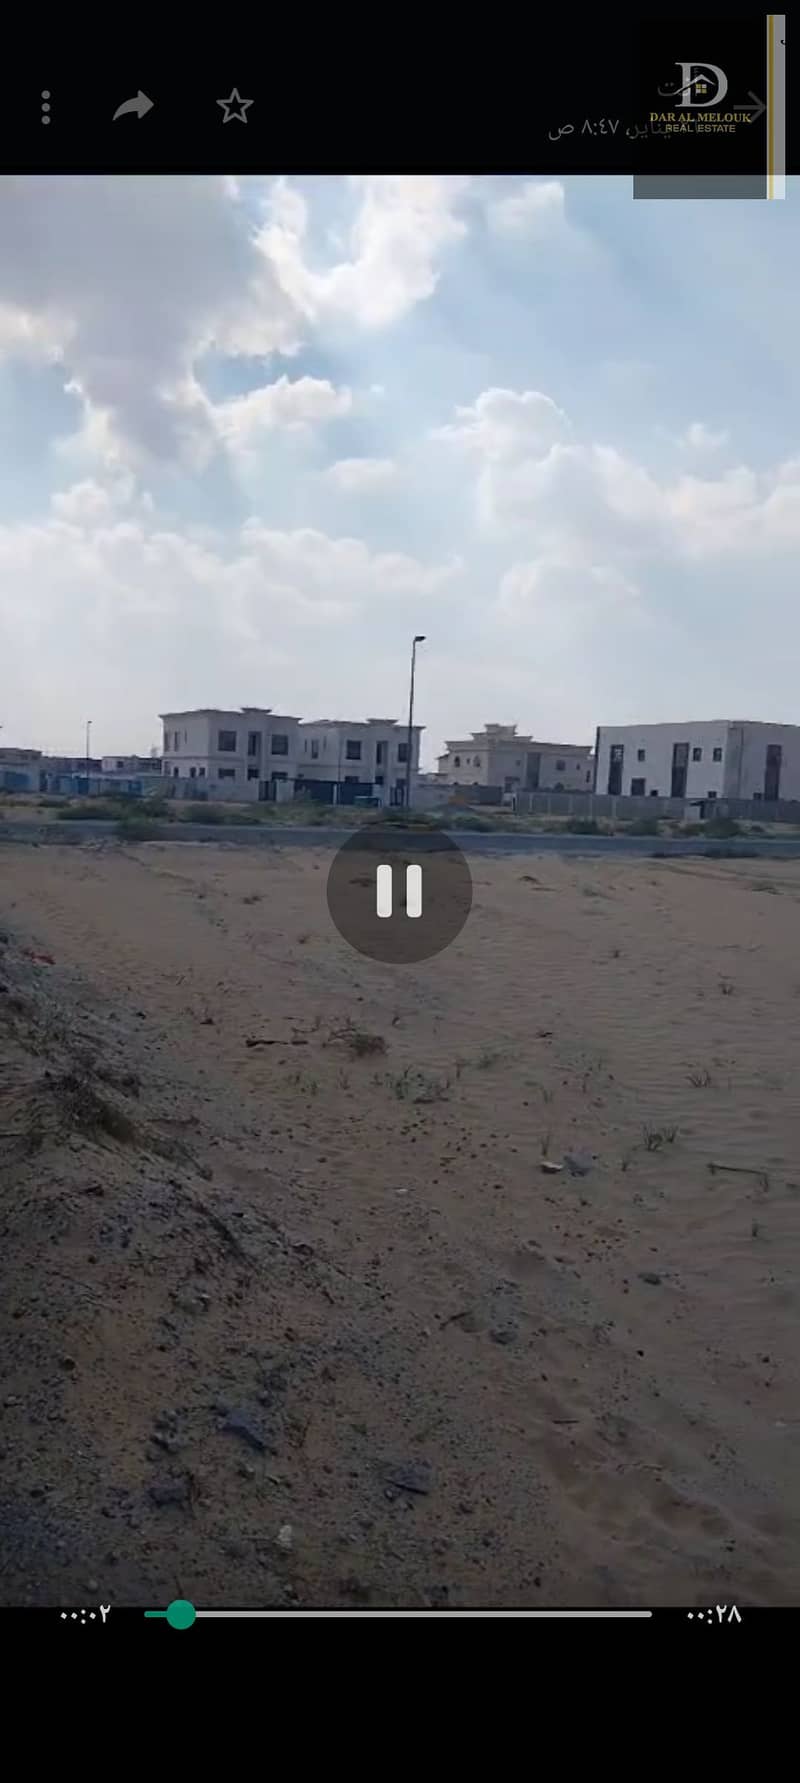 For sale in Sharjah, Al-Hoshi area, residential and investment land, area of ​​6,000 feet, permit for a ground villa and the first, excellent location on a 24-meter street, freehold installments completed, all Arab nationalities, close to the roundabout,s